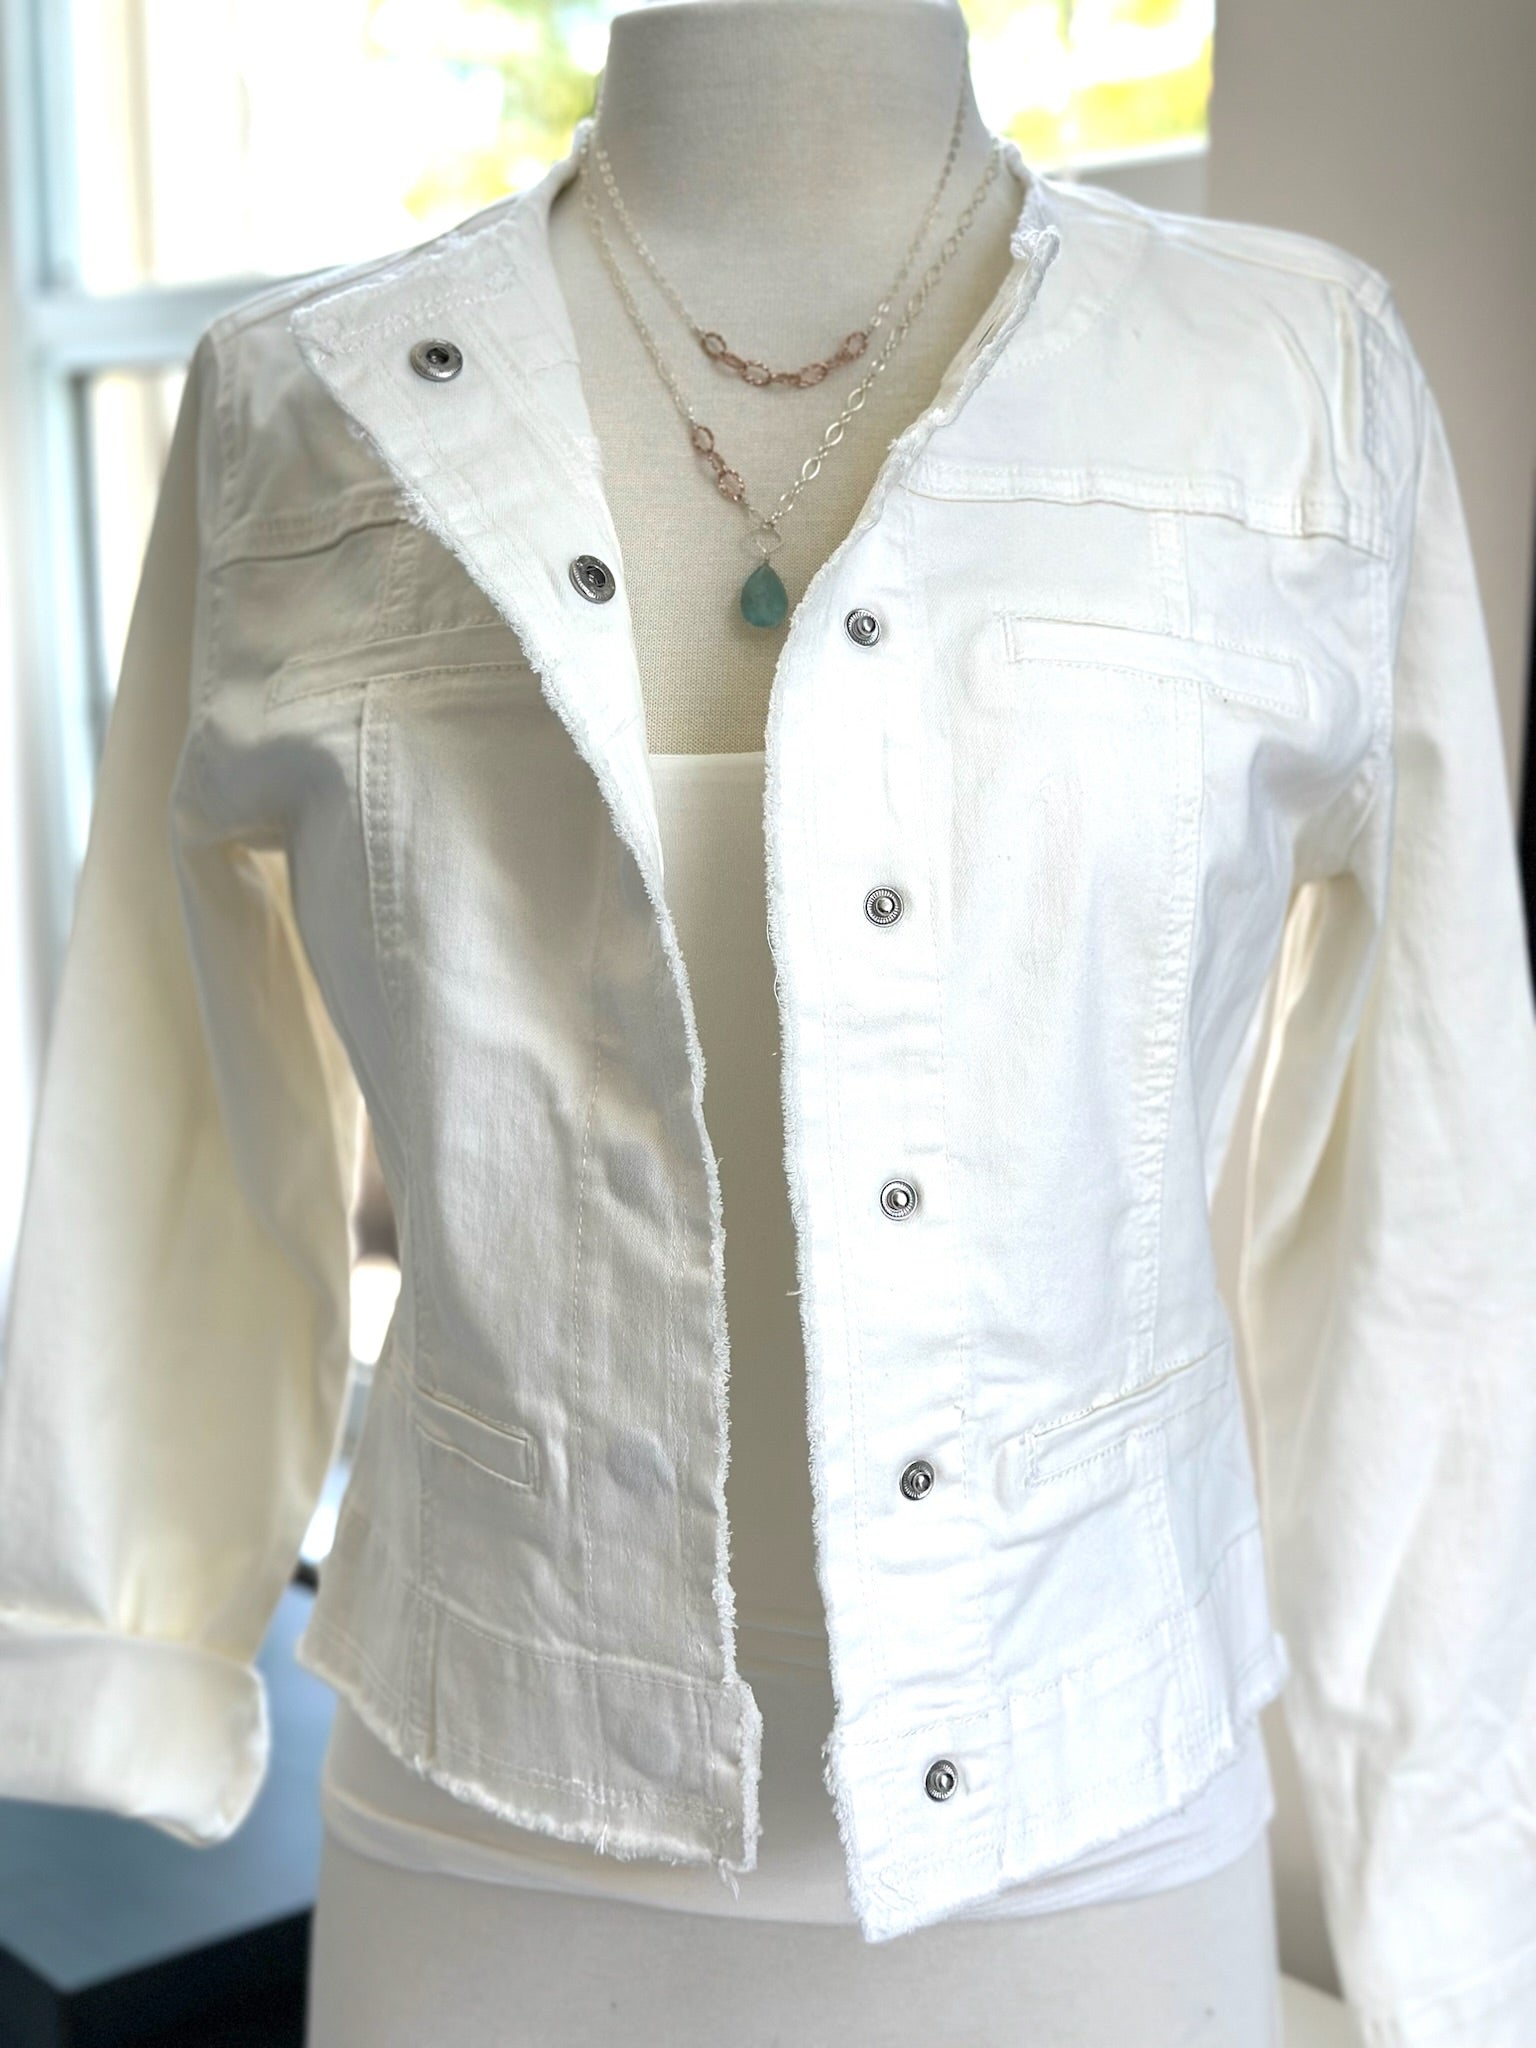 Caroline styled with Kendra jacket and exclusive nh Handmade pieces